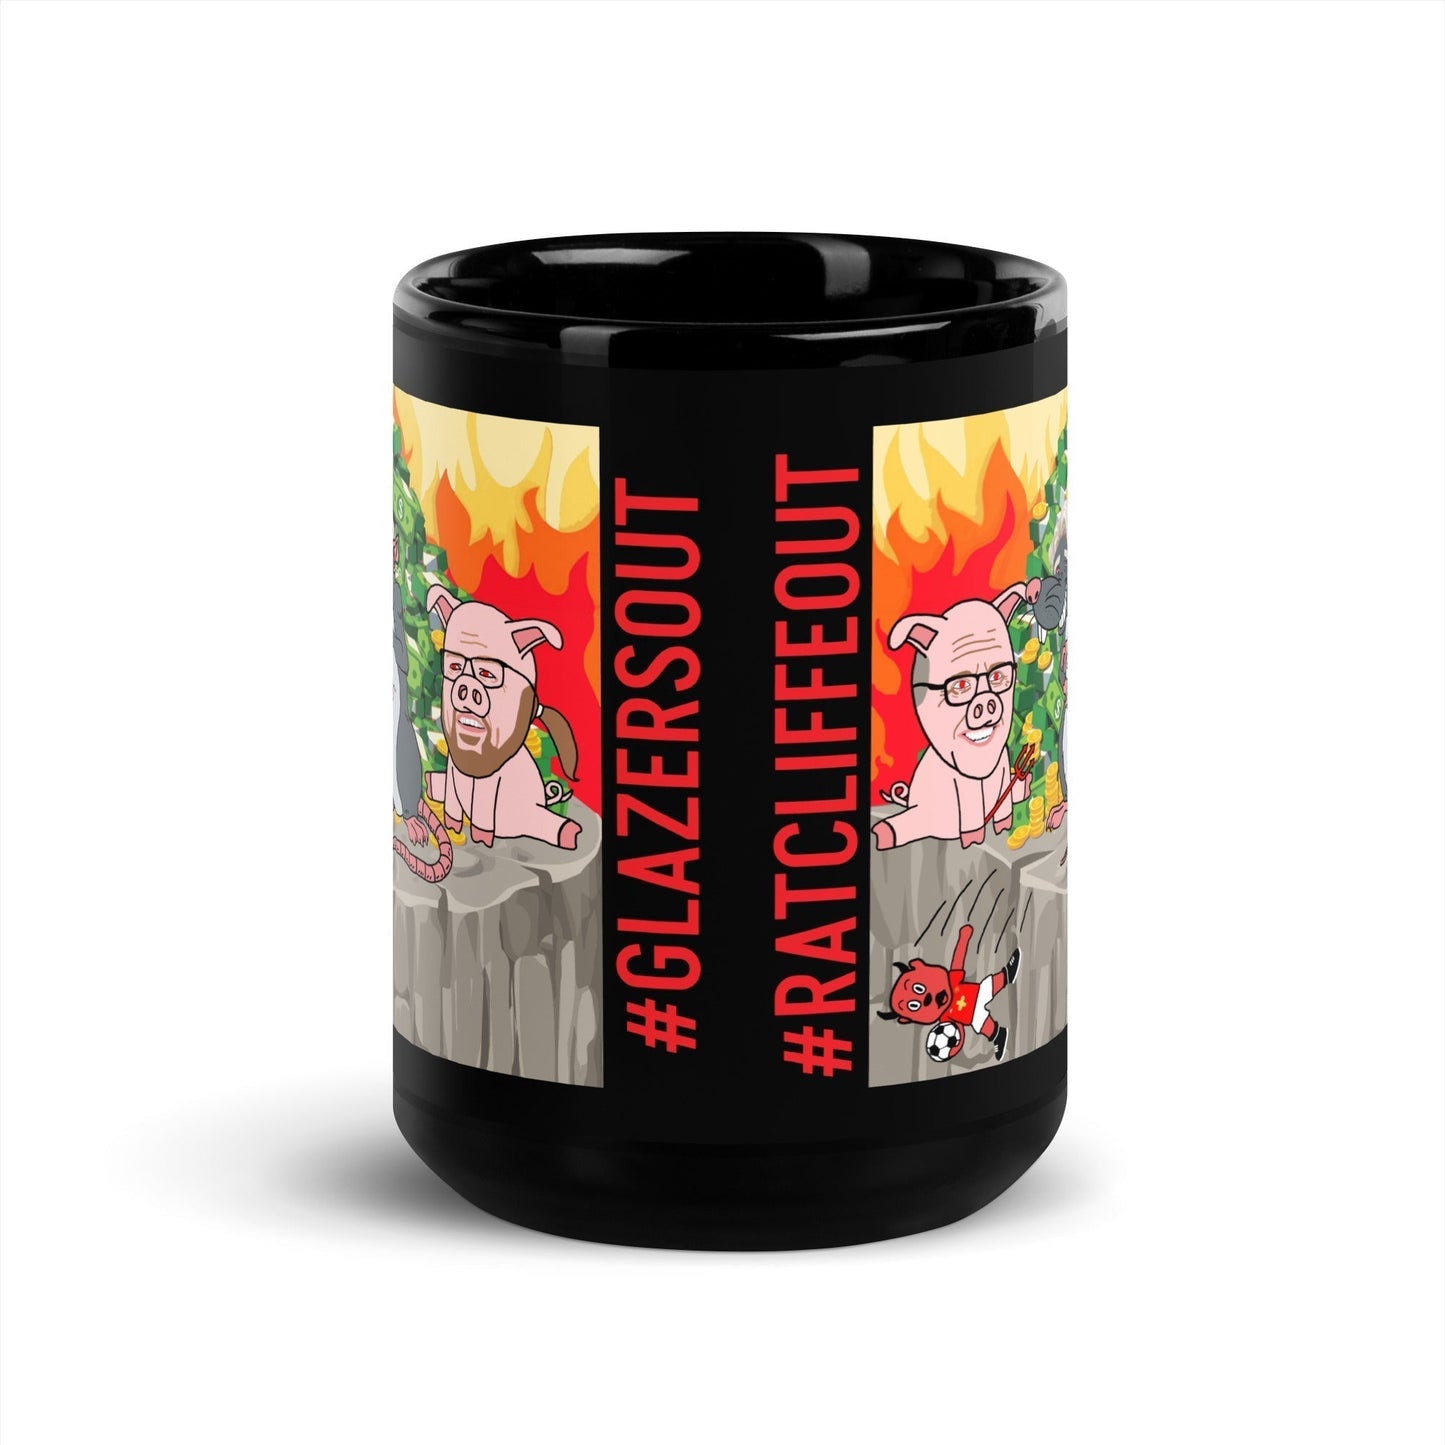 Manchester United Ratcliffe Out, Glazers Out Black Glossy Mug/ Cup Next Cult Brand Football, GlazersOut, Manchester United, RatcliffeOut